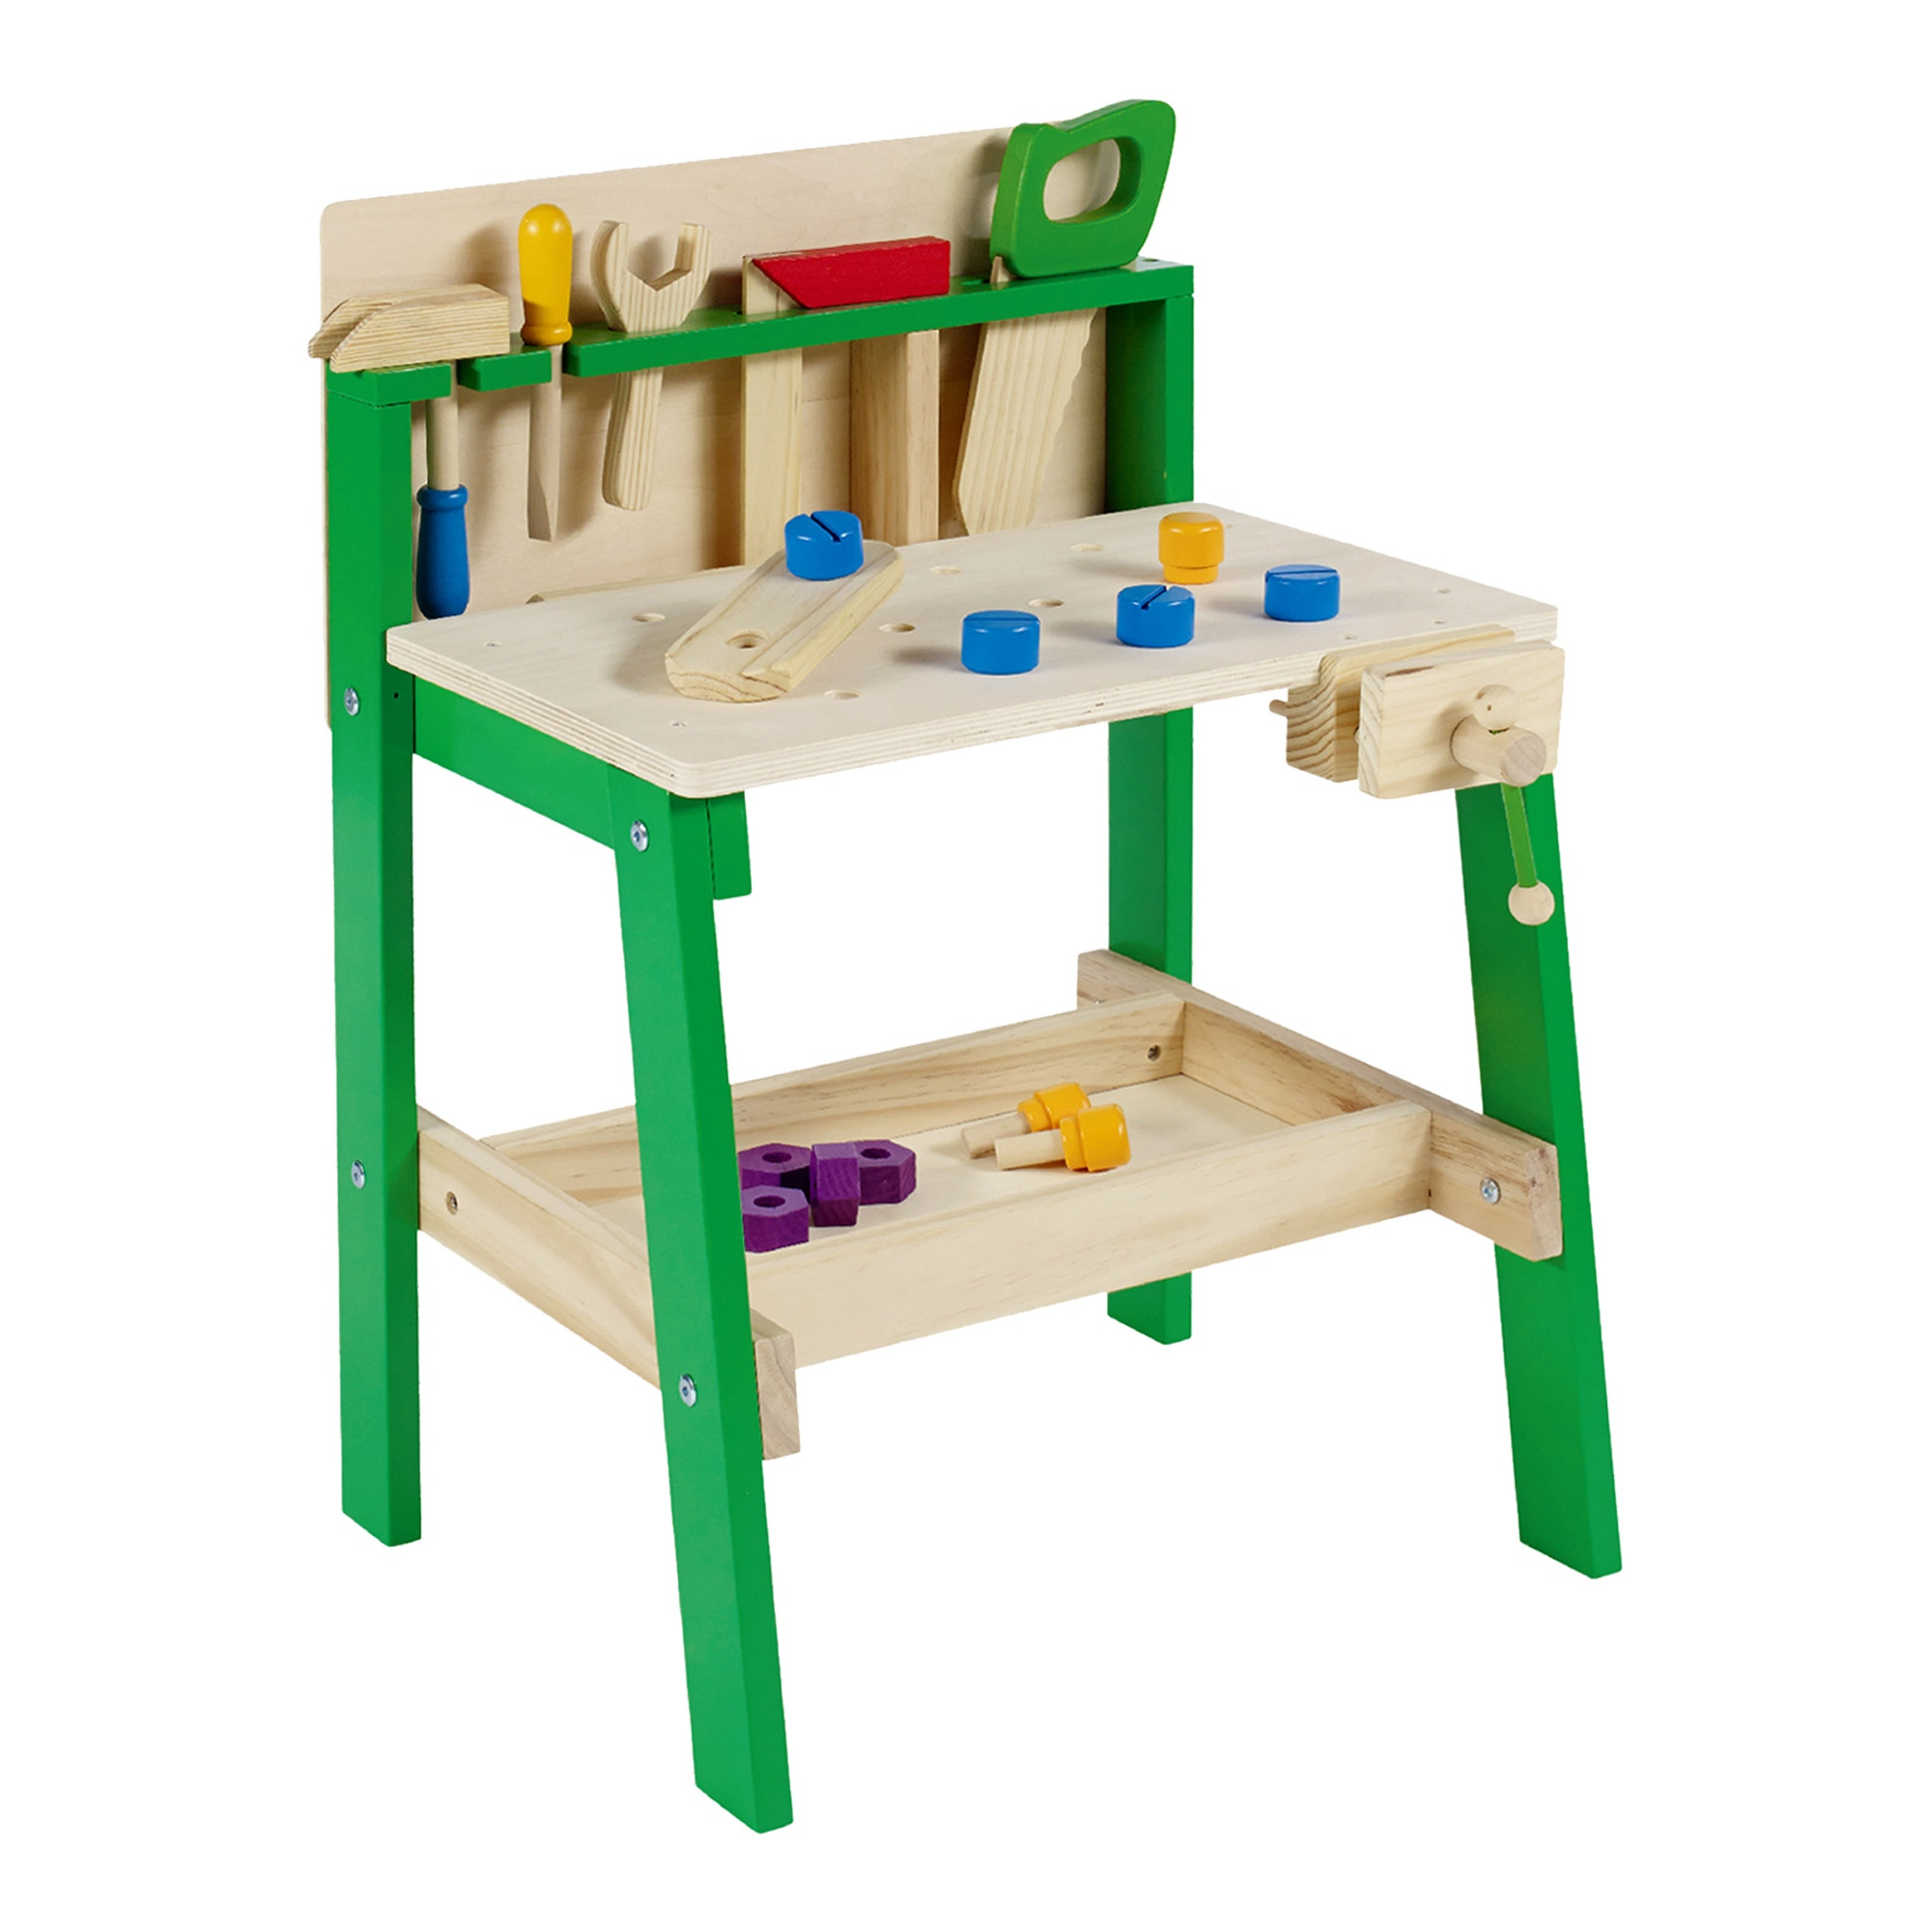 Kids Tool Table
 Kids Tool Work Bench Wooden DIY Table Work Creative Role